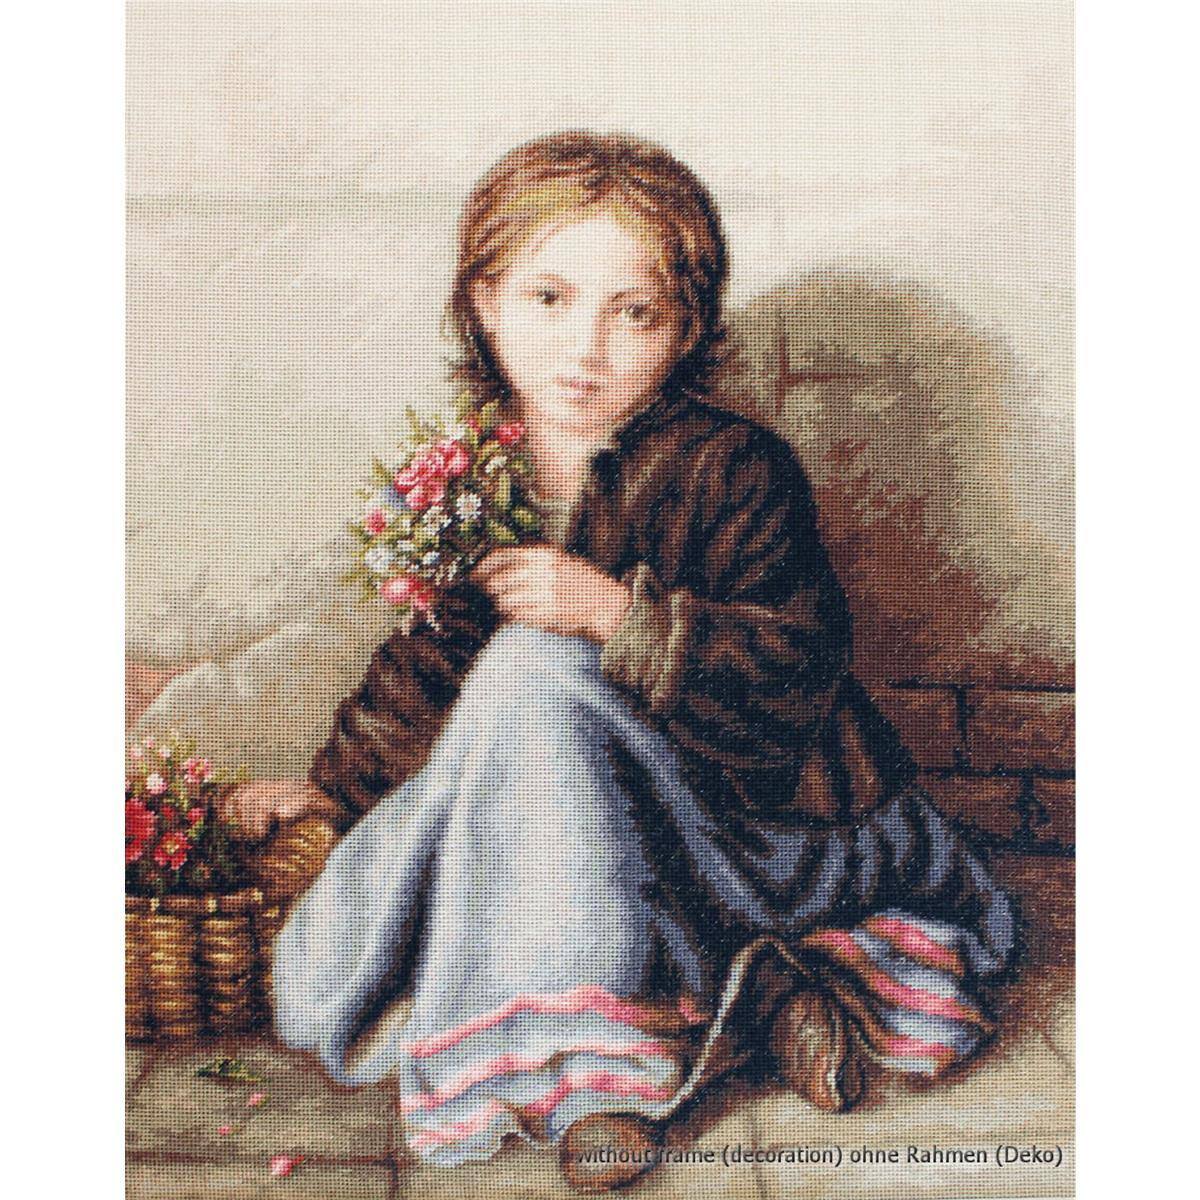 One painting shows a young girl sitting on the floor...